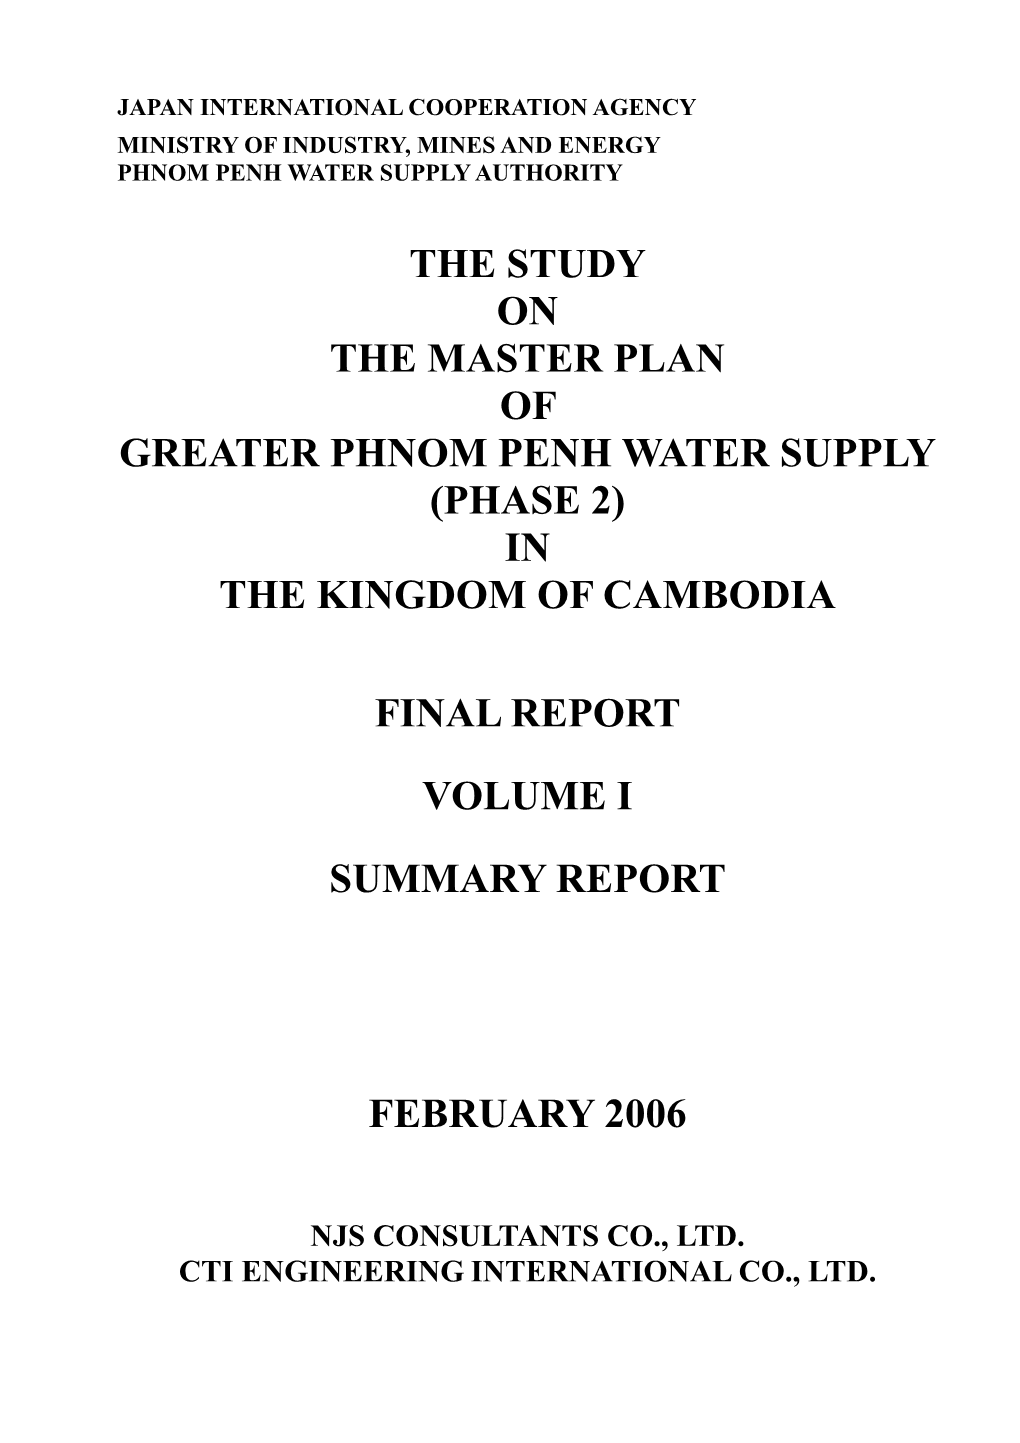 The Study on the Master Plan of Greater Phnom Penh Water Supply (Phase 2) in the Kingdom of Cambodia